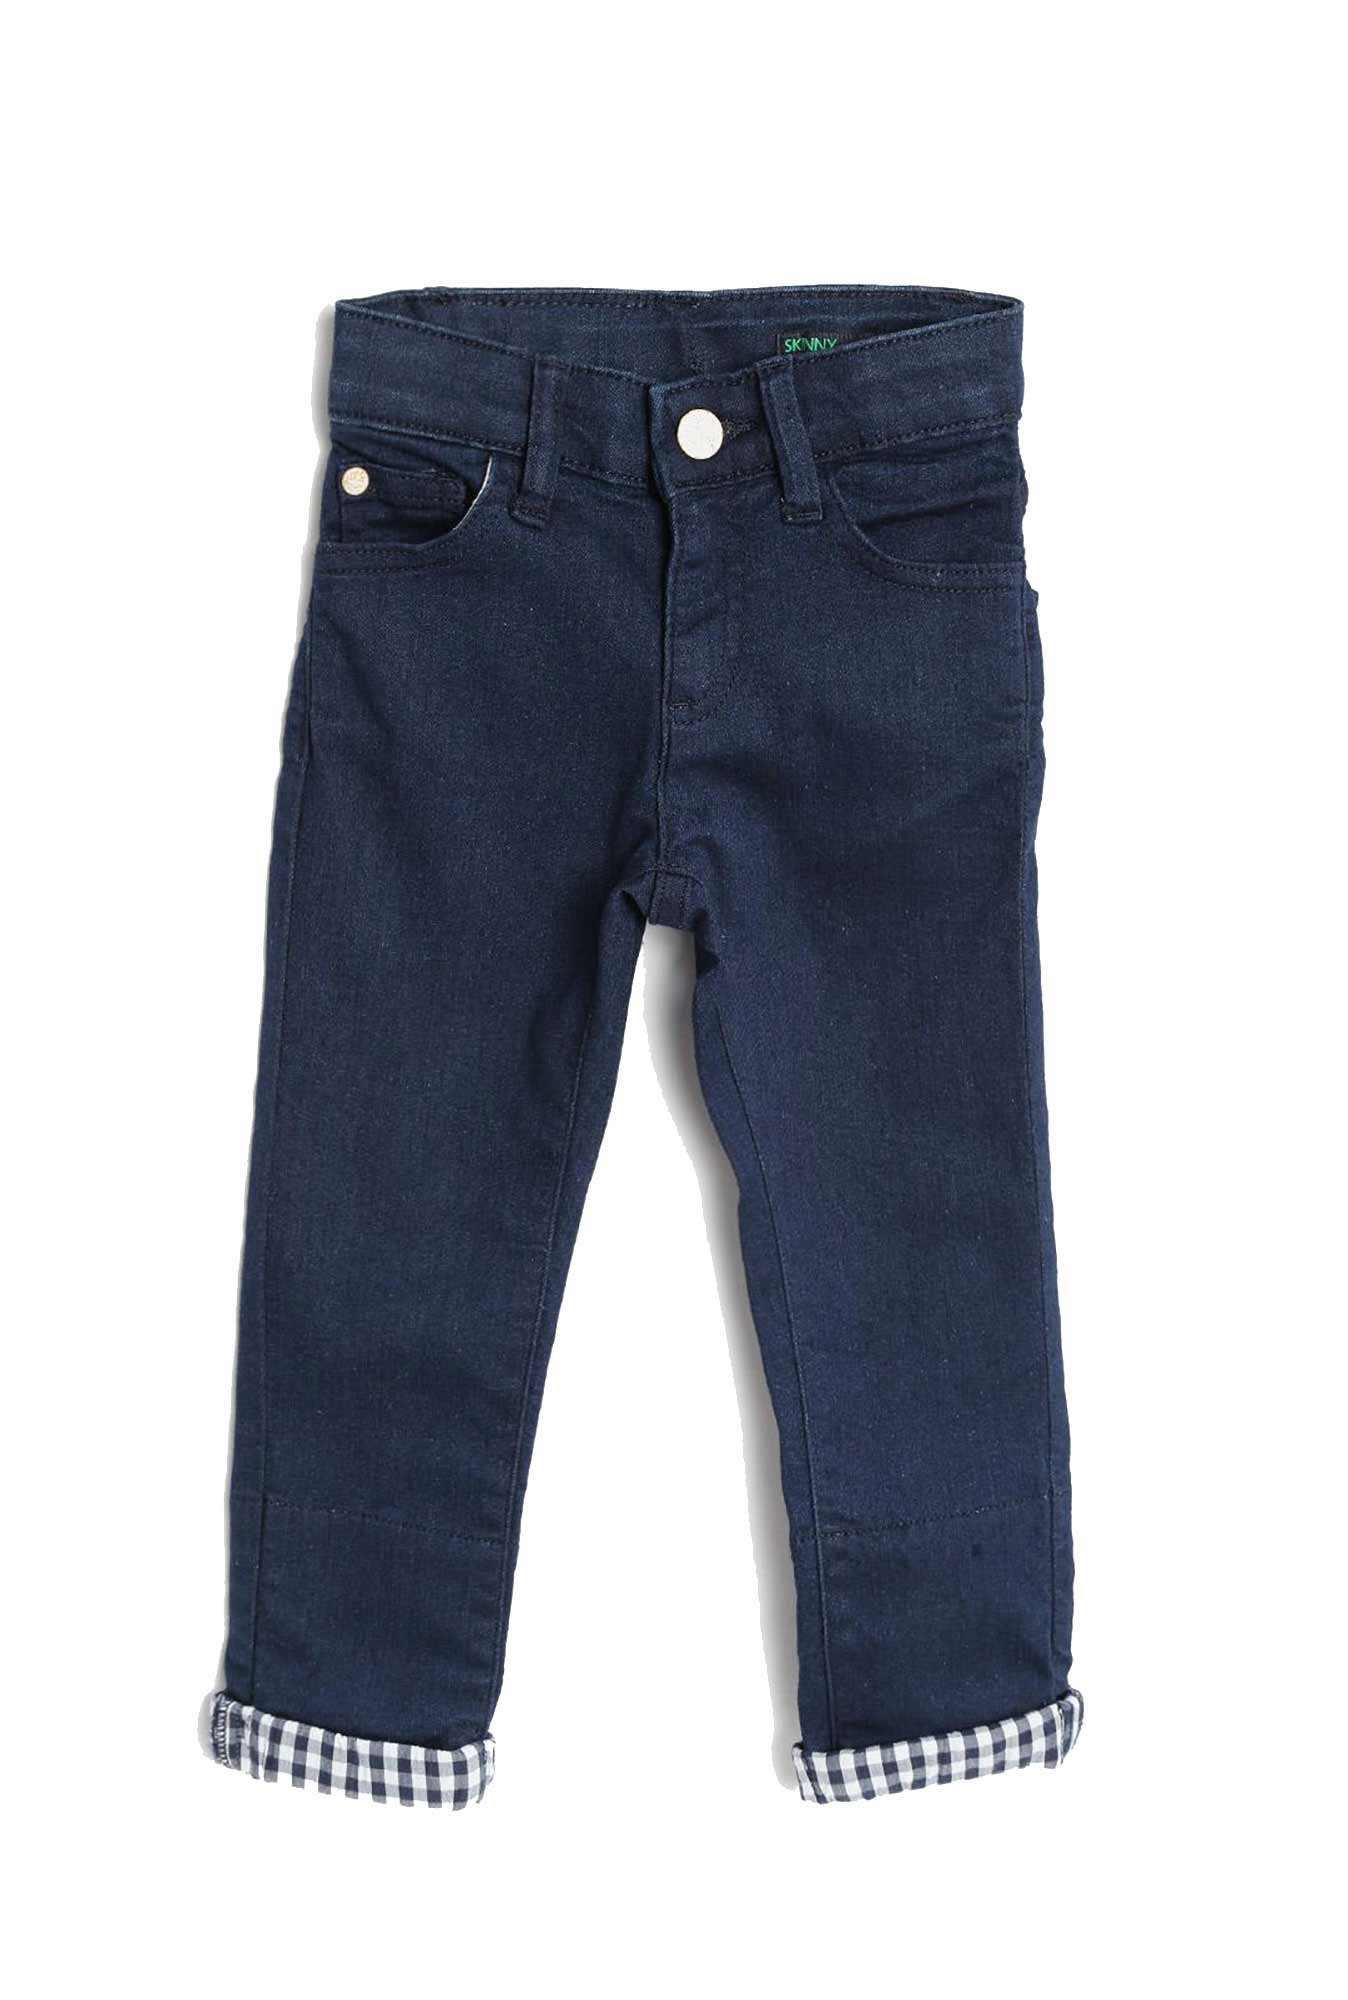 united colors of benetton jeans price